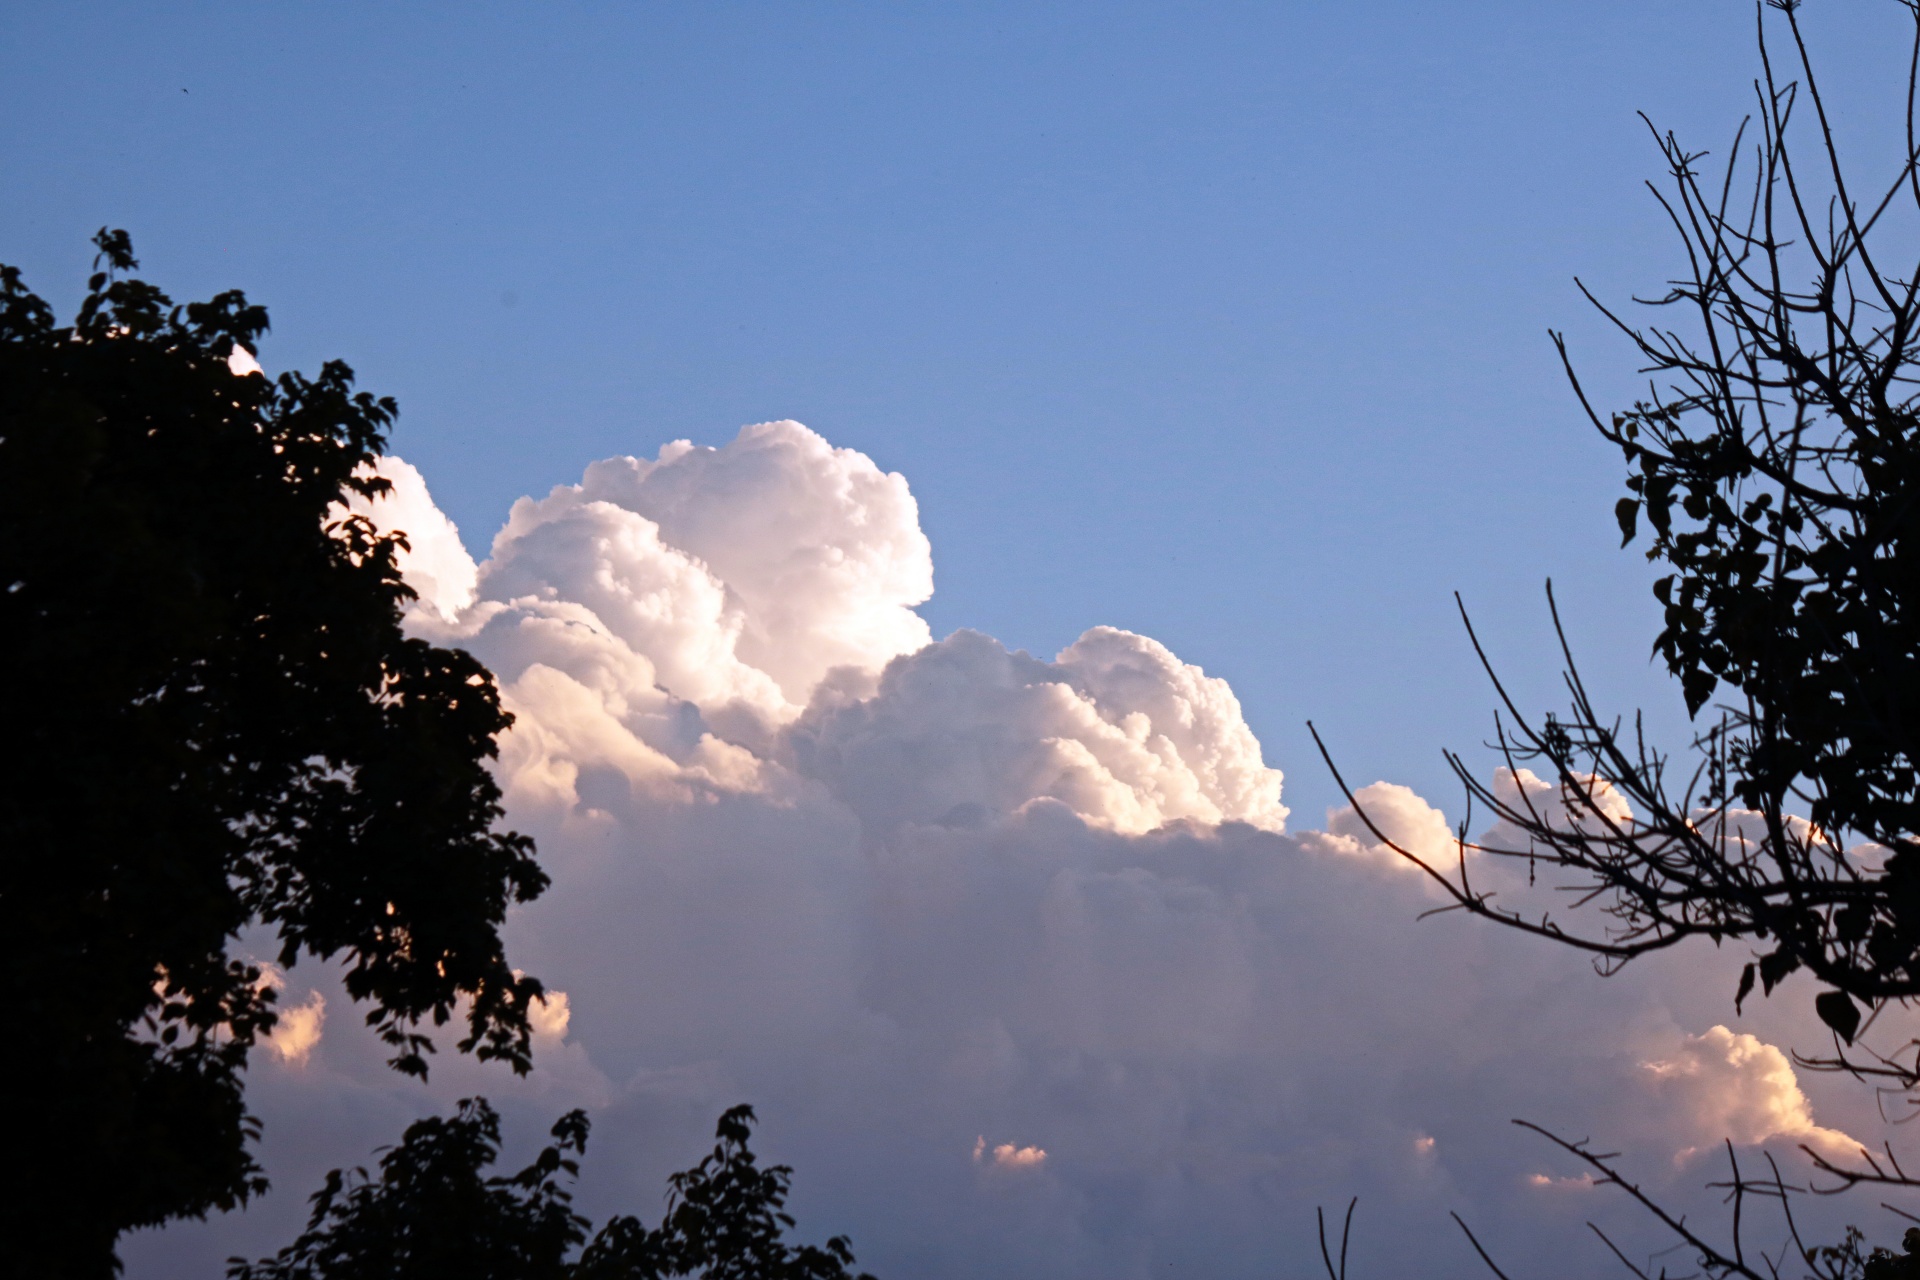 foliage on trees in silhoute with large glowing billowing clouds